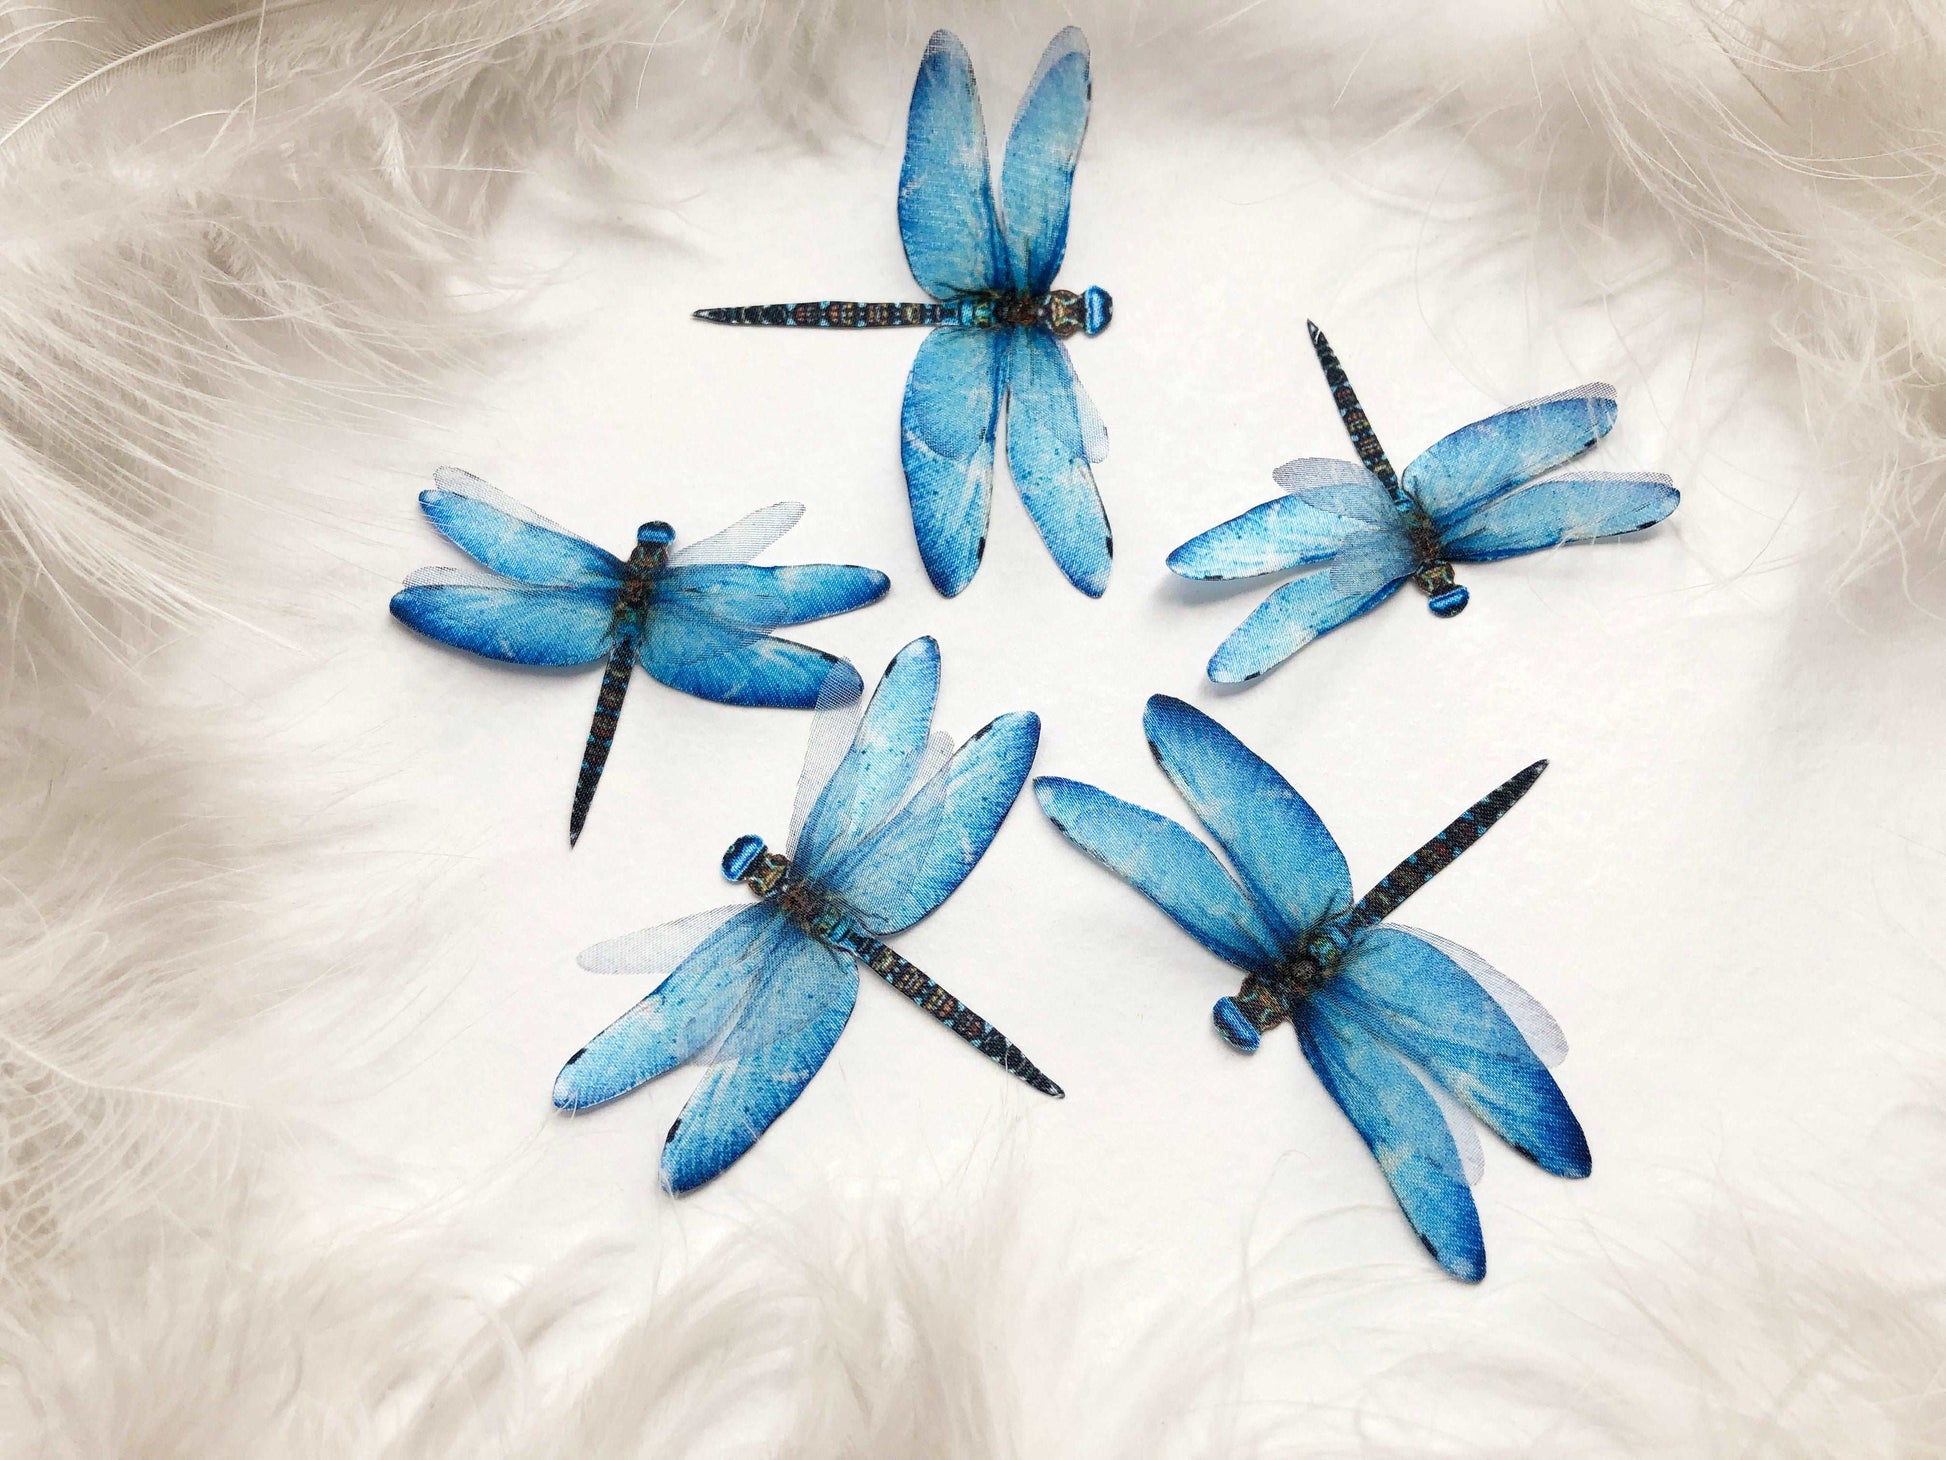 5 Blue Dragonflies in Shape of Star on White Background with Feathers